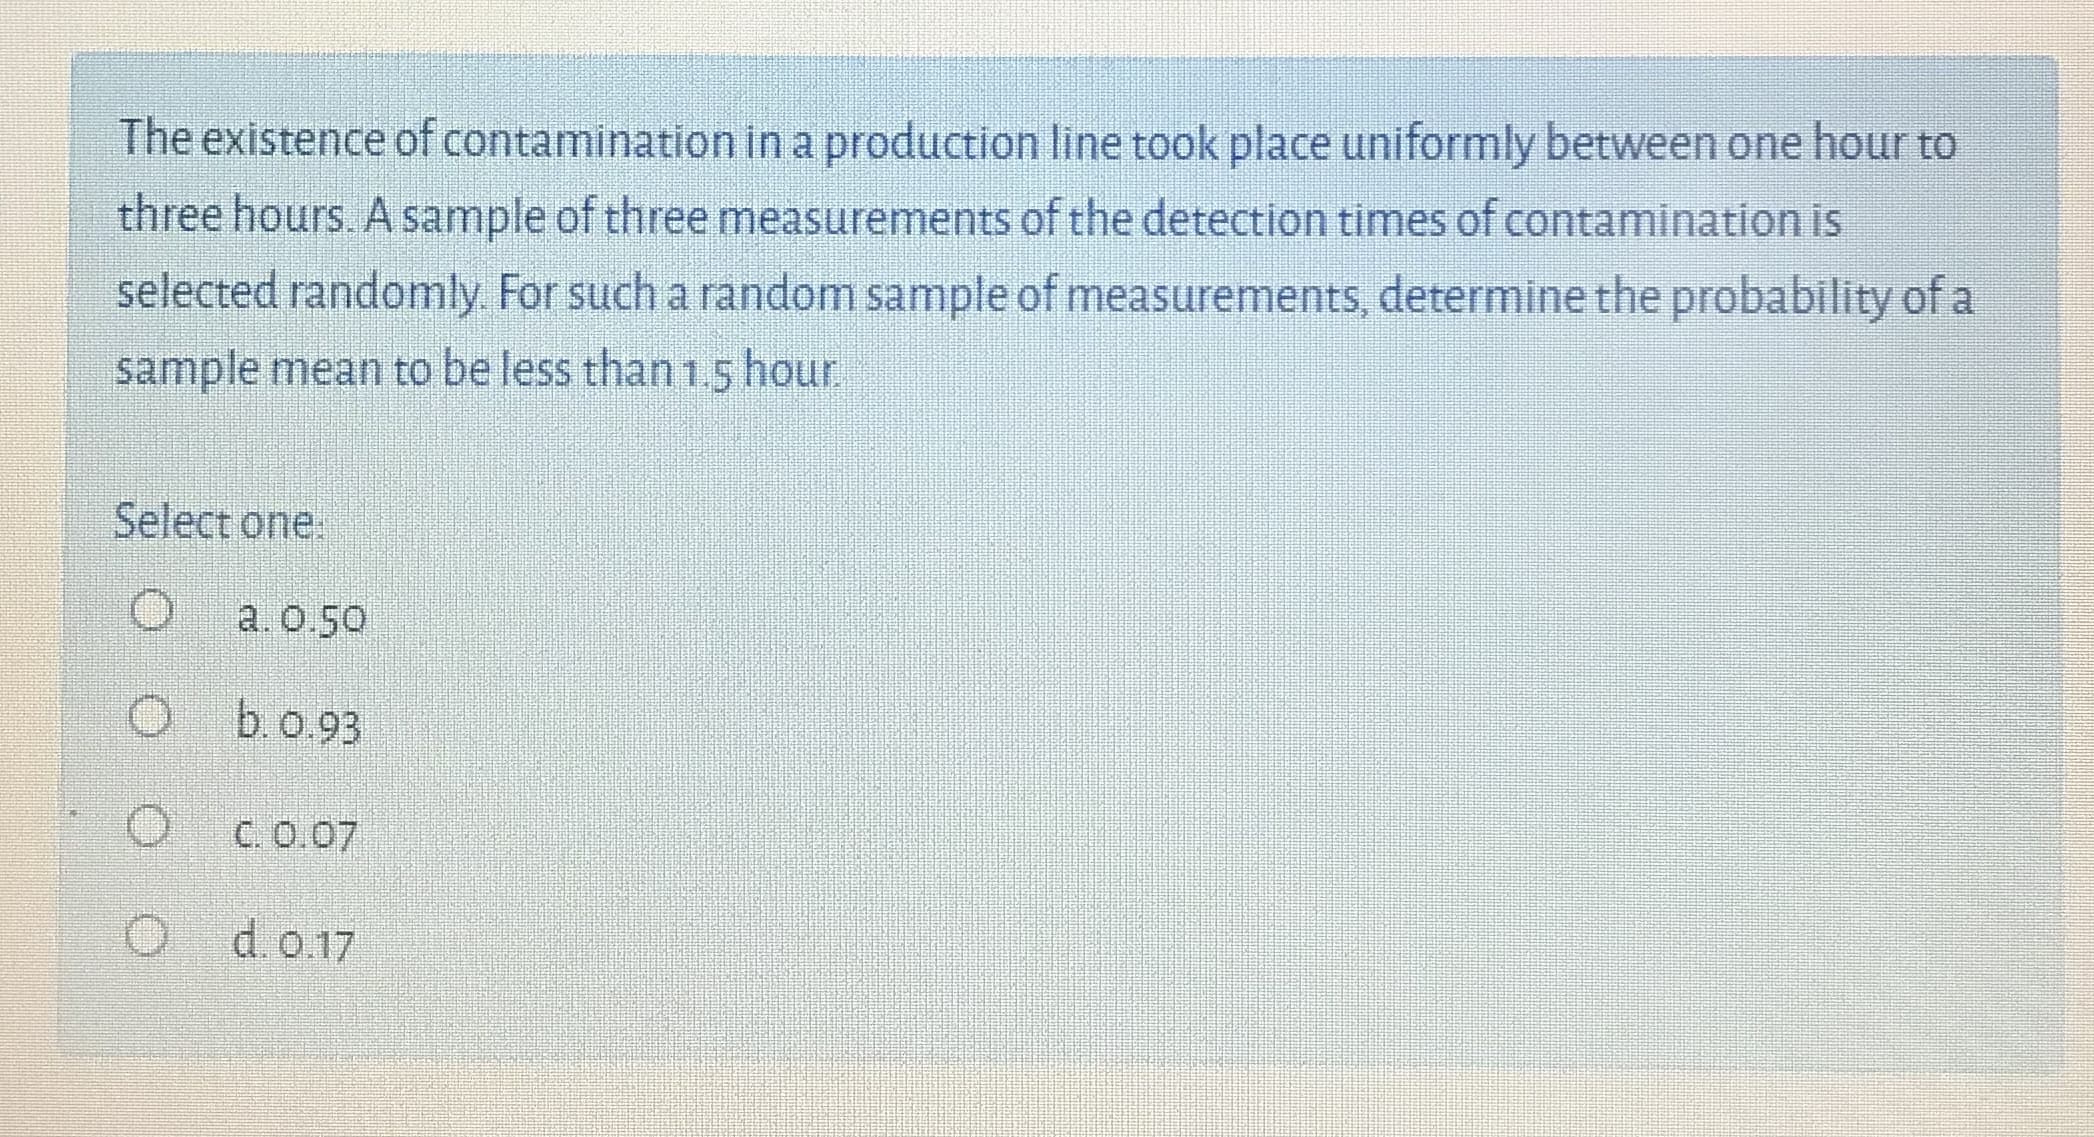 The existence of contamination in a production line took place uniformly between one hour to
three hours. A sample of three measurements of the detection times of contamination is
selected randomly. For such a random sample of measurements, determine the probability of a
sample mean to be less than 1.5 hour
